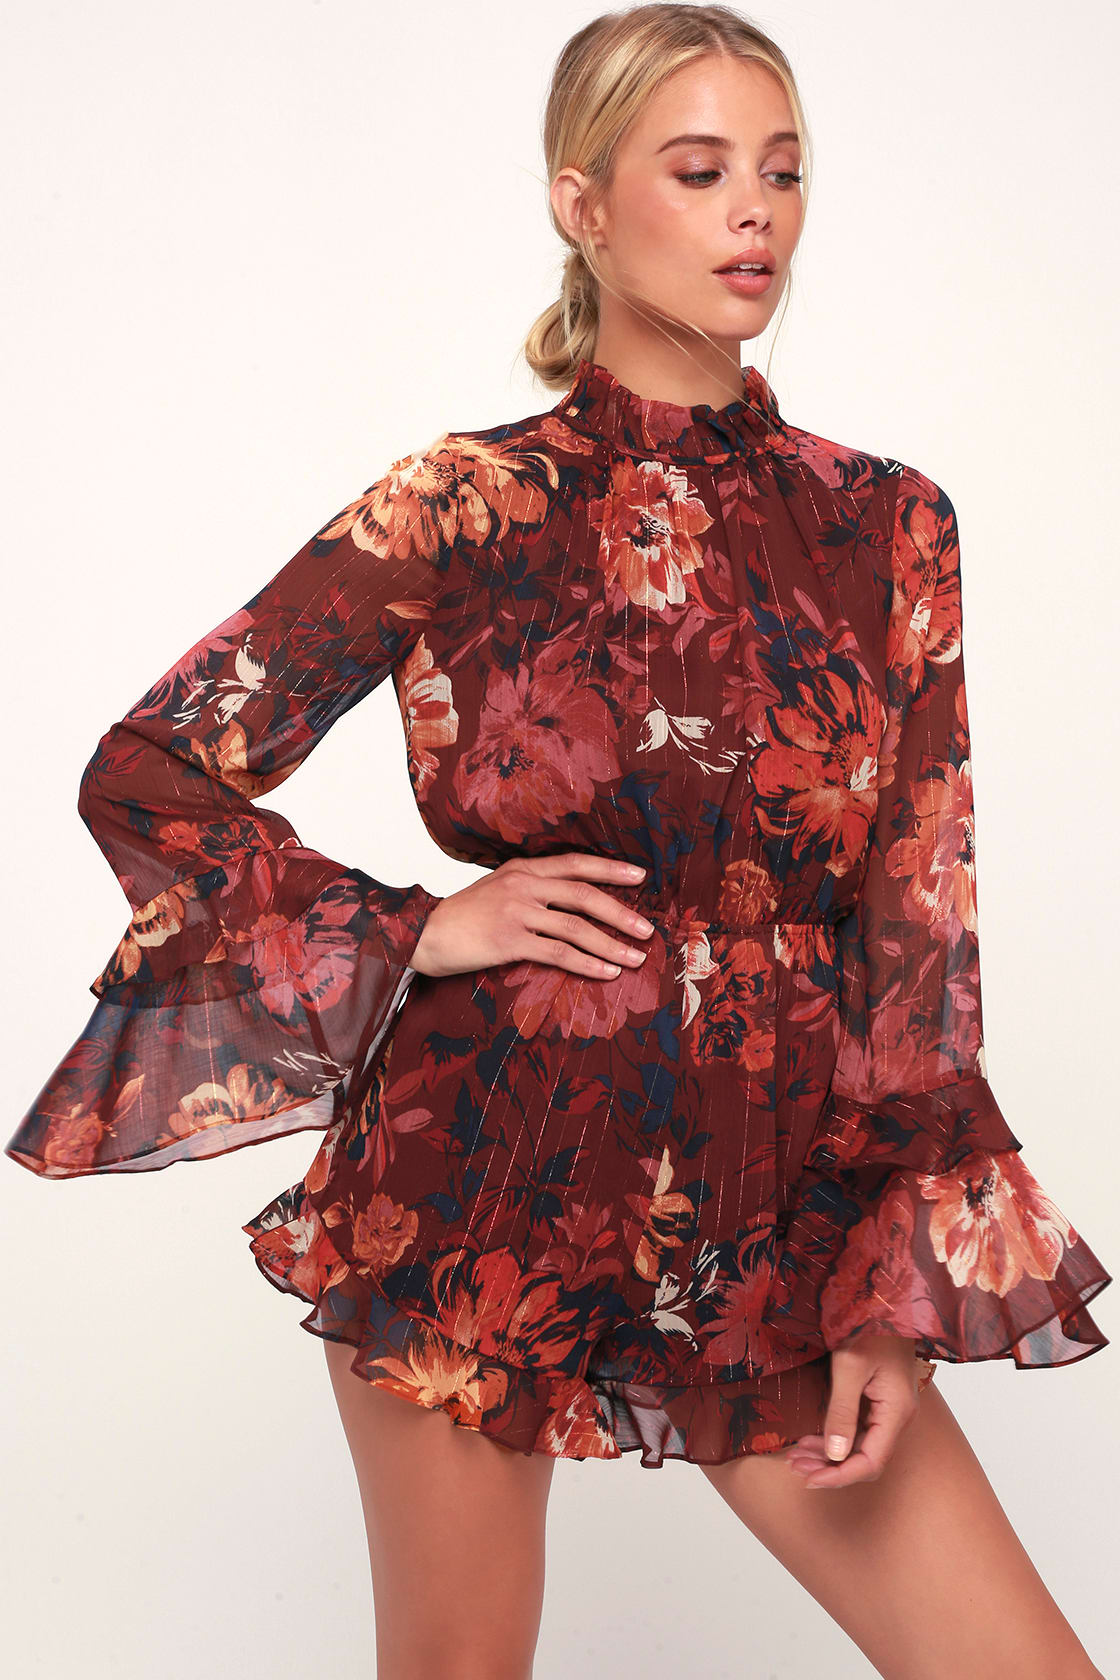 Getting All Your Love Wine Red Floral Print Long Sleeve Romper - Lulus